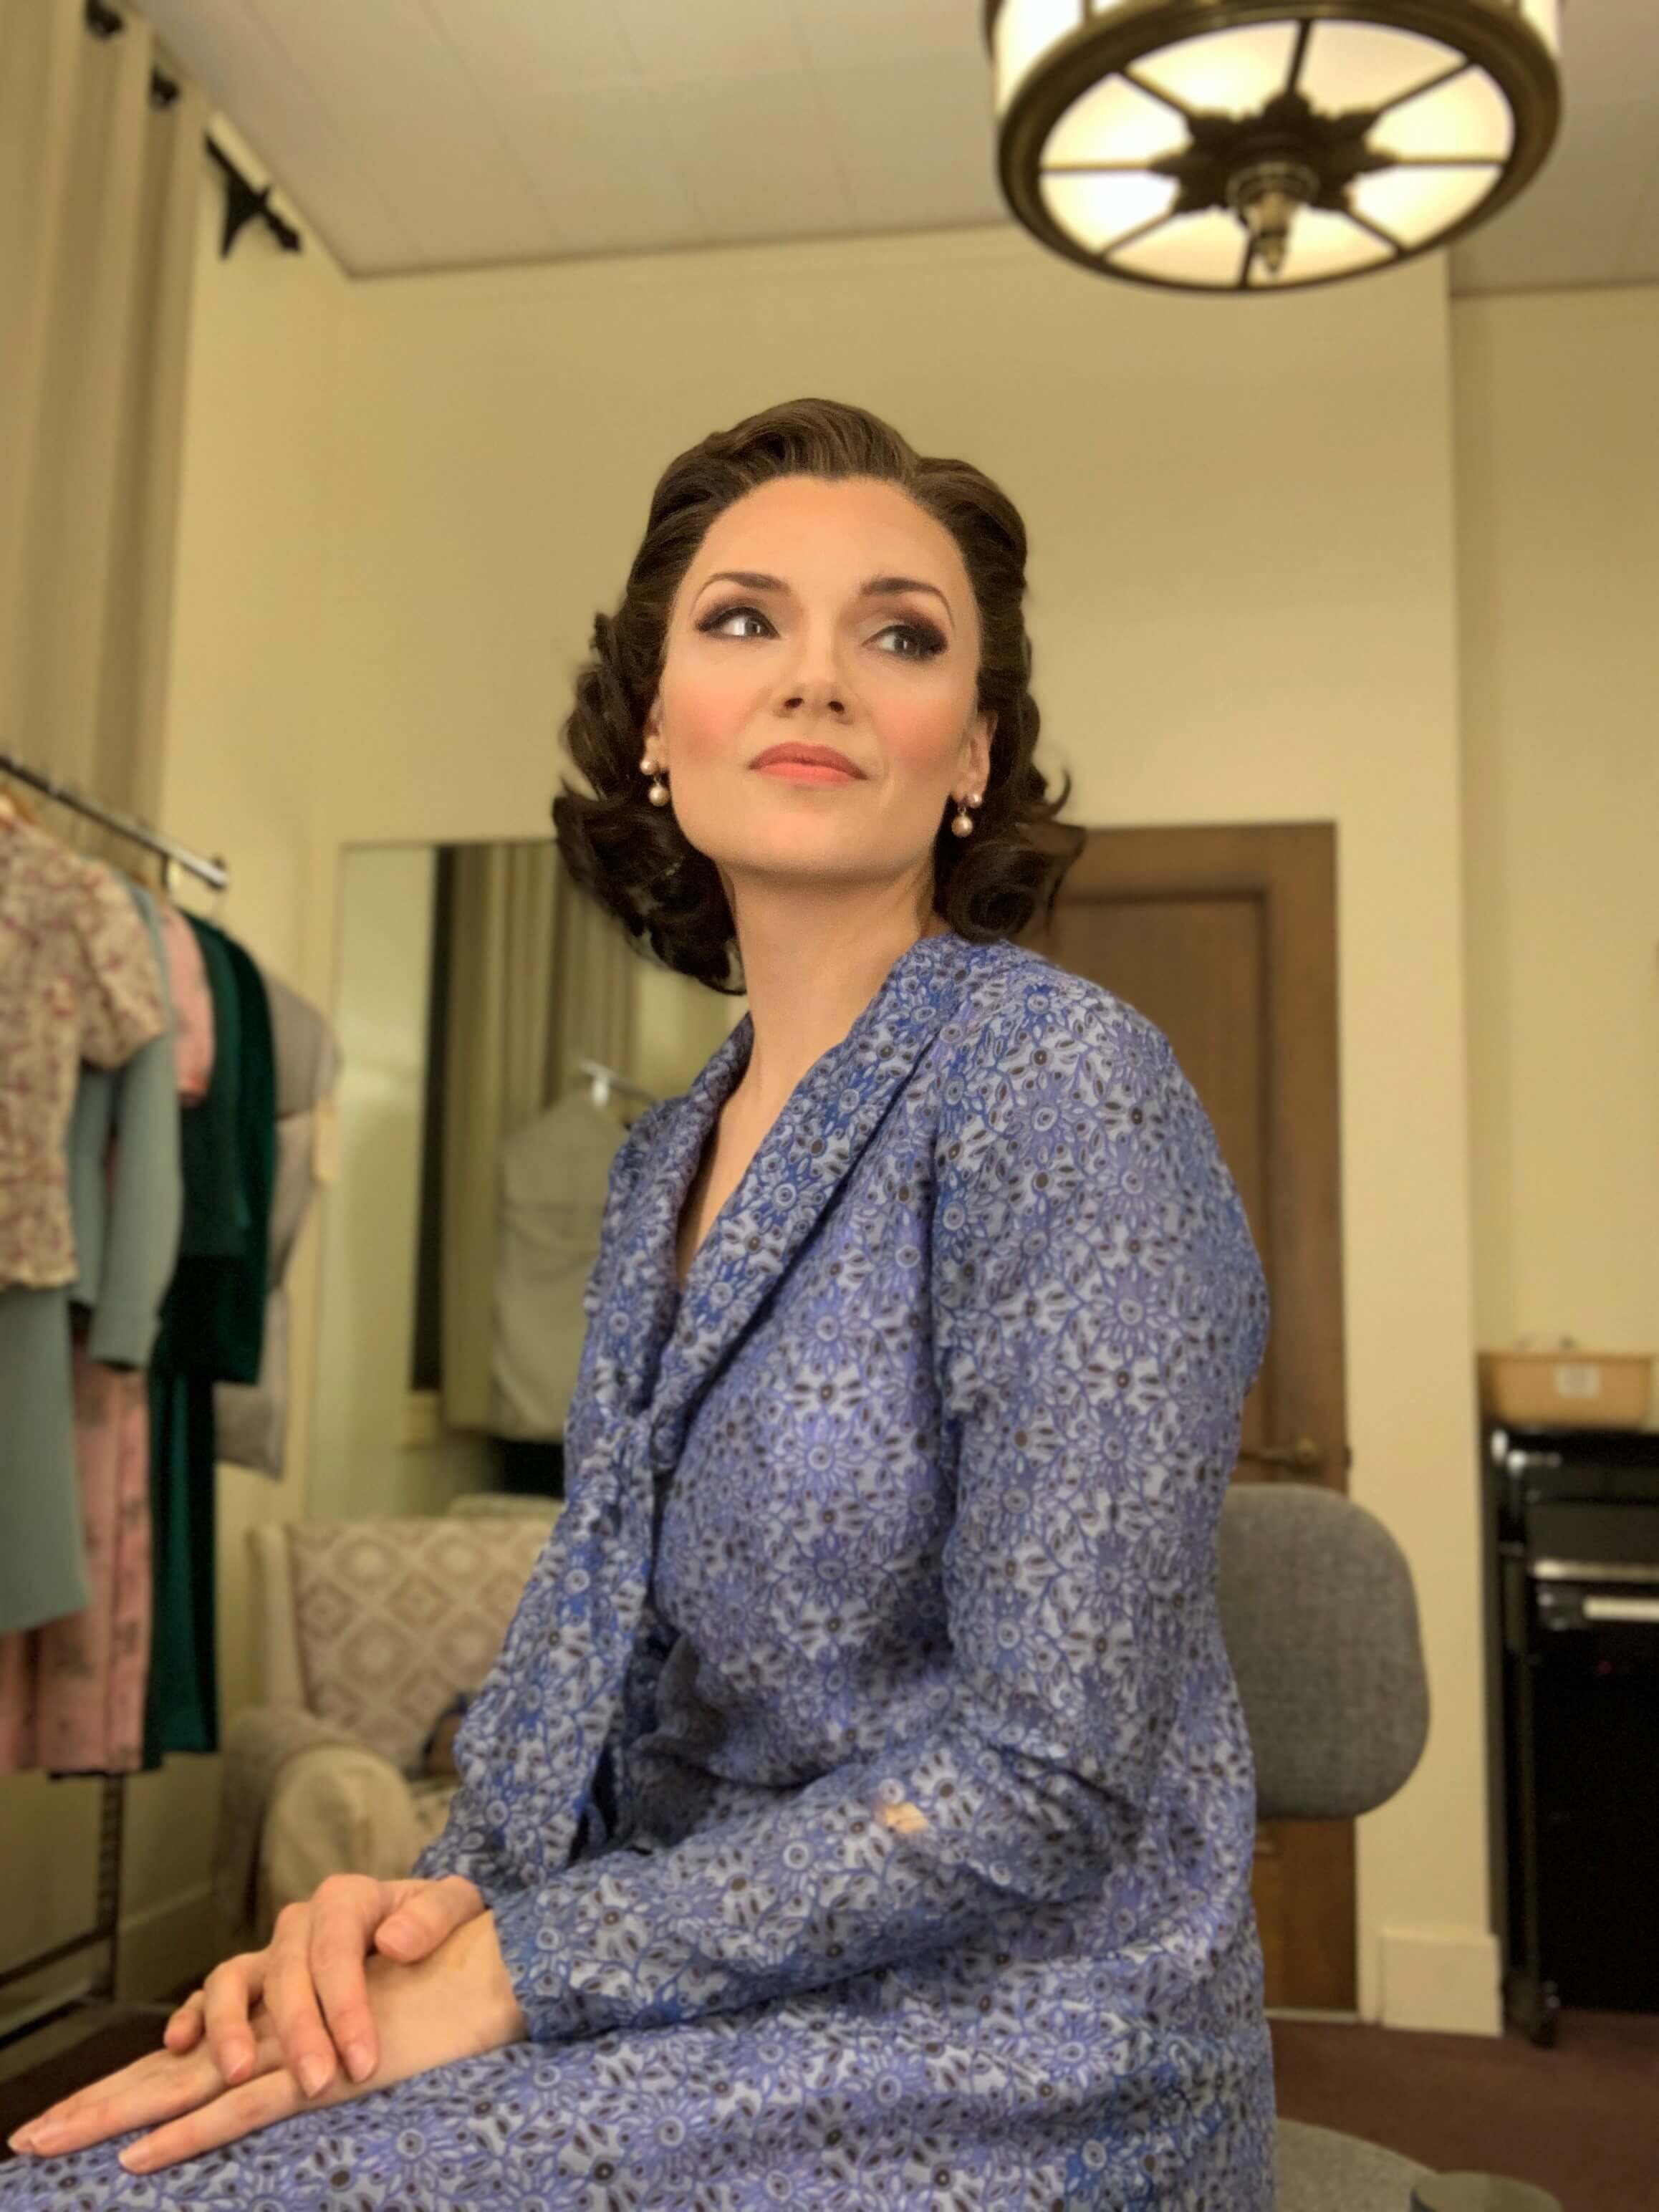 Andriana in her dressing room enjoying a moment of tranquility amidst the very busy role of Mary. (Photo courtesy of Andriana Chuchman.)